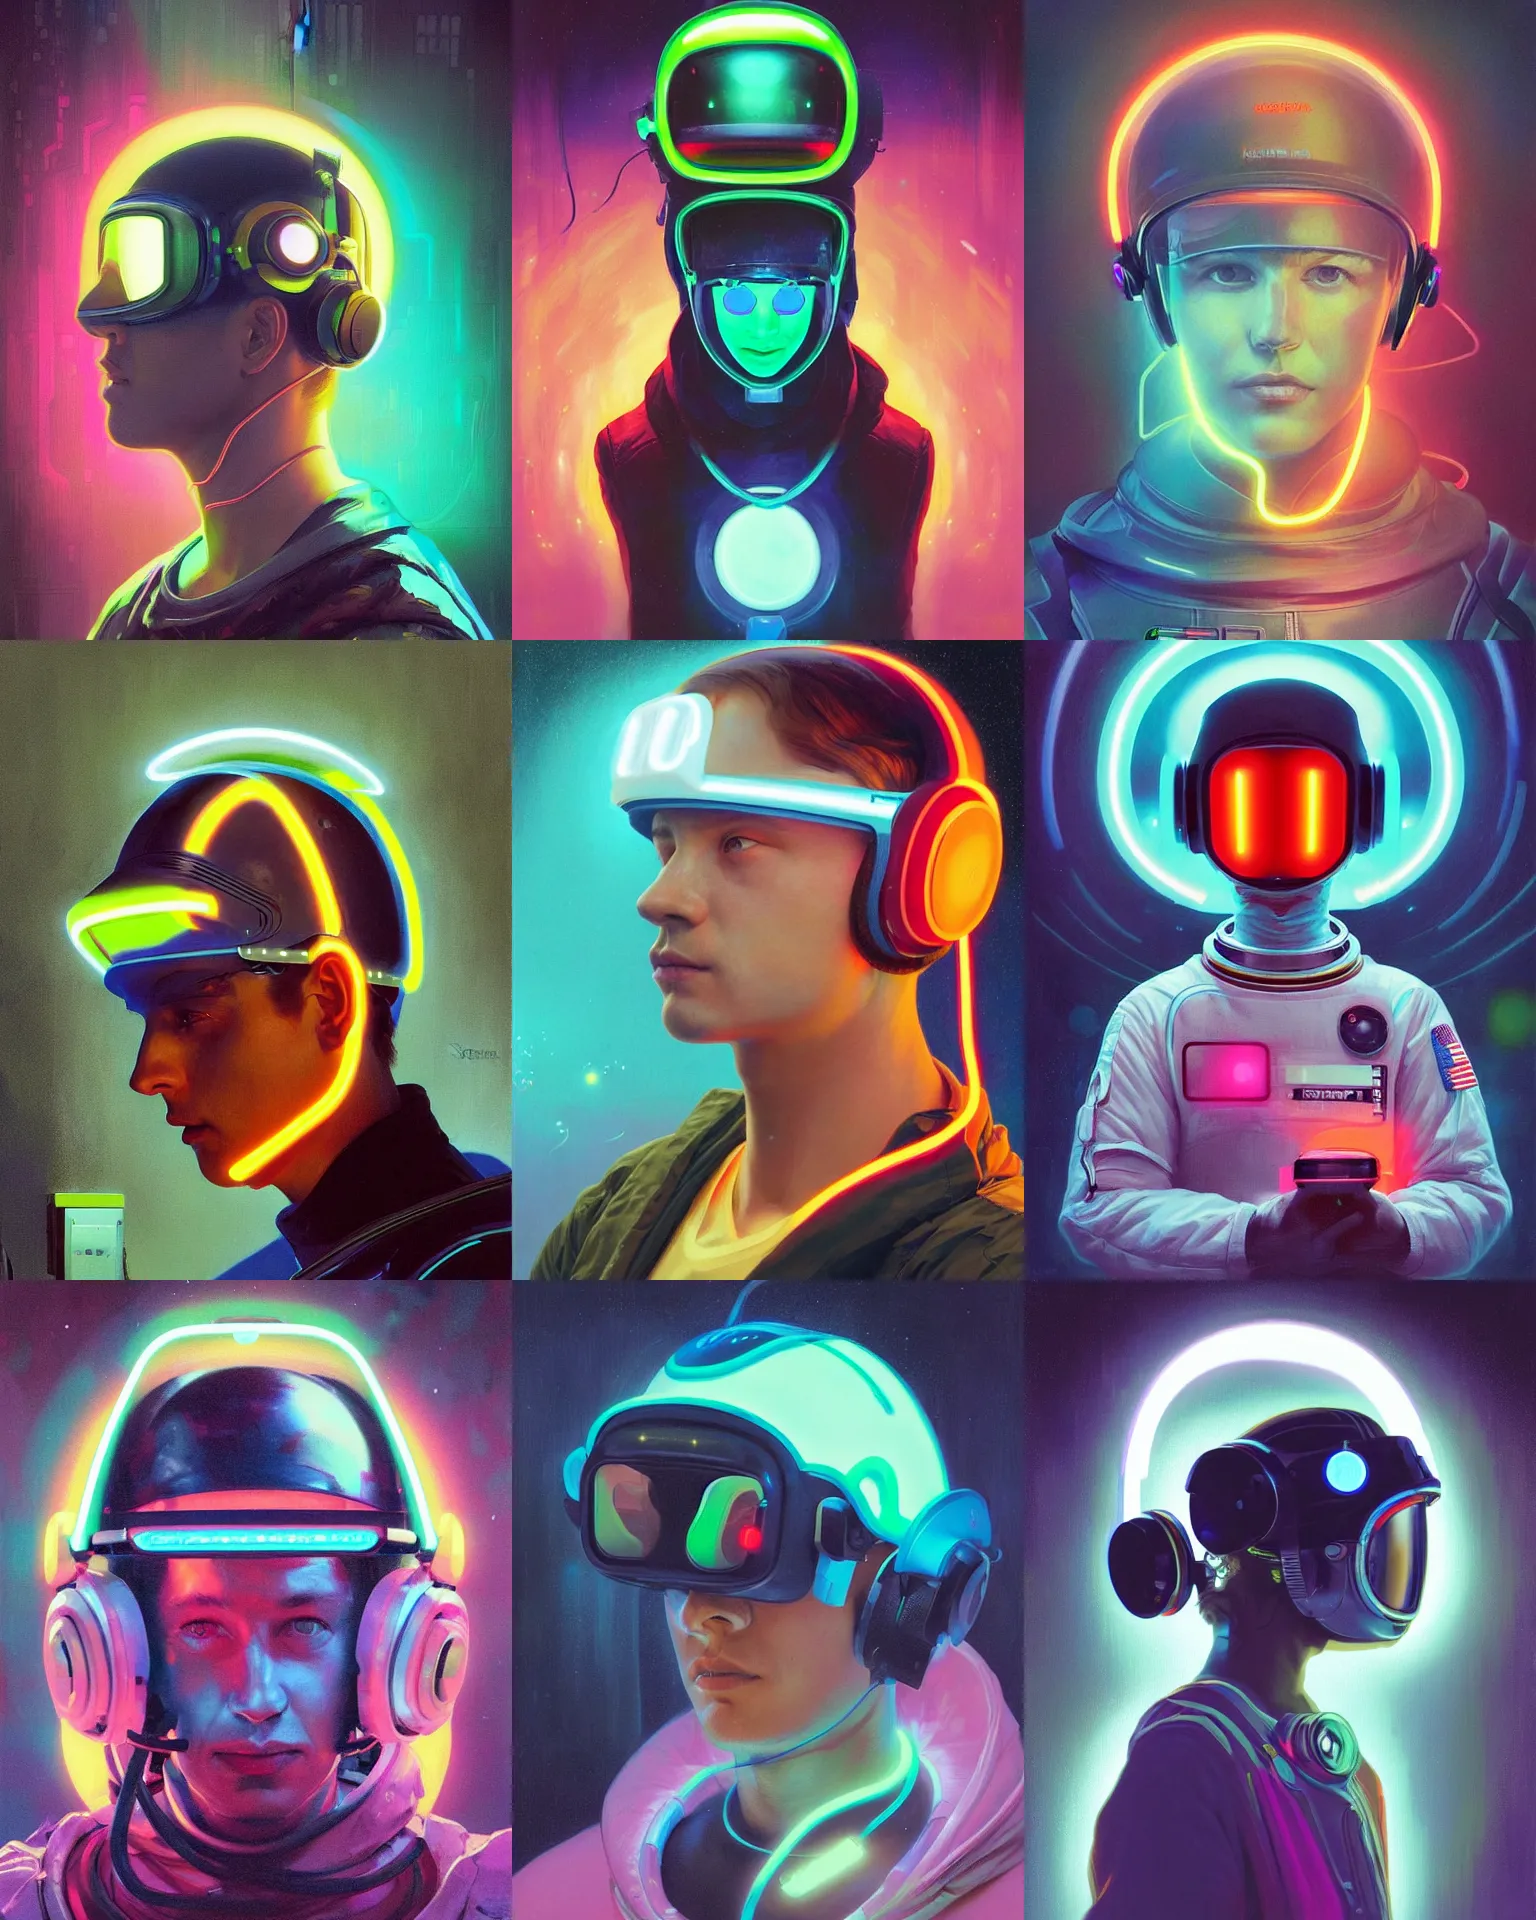 Prompt: future coder looking on, glowing visor over eyes and sleek neon headphones, neon accents, desaturated headshot portrait painting by dean cornwall, ilya repin, rhads, tom whalen, alex grey, alphonse mucha, donoto giancola, astronaut cyberpunk electric fashion photography